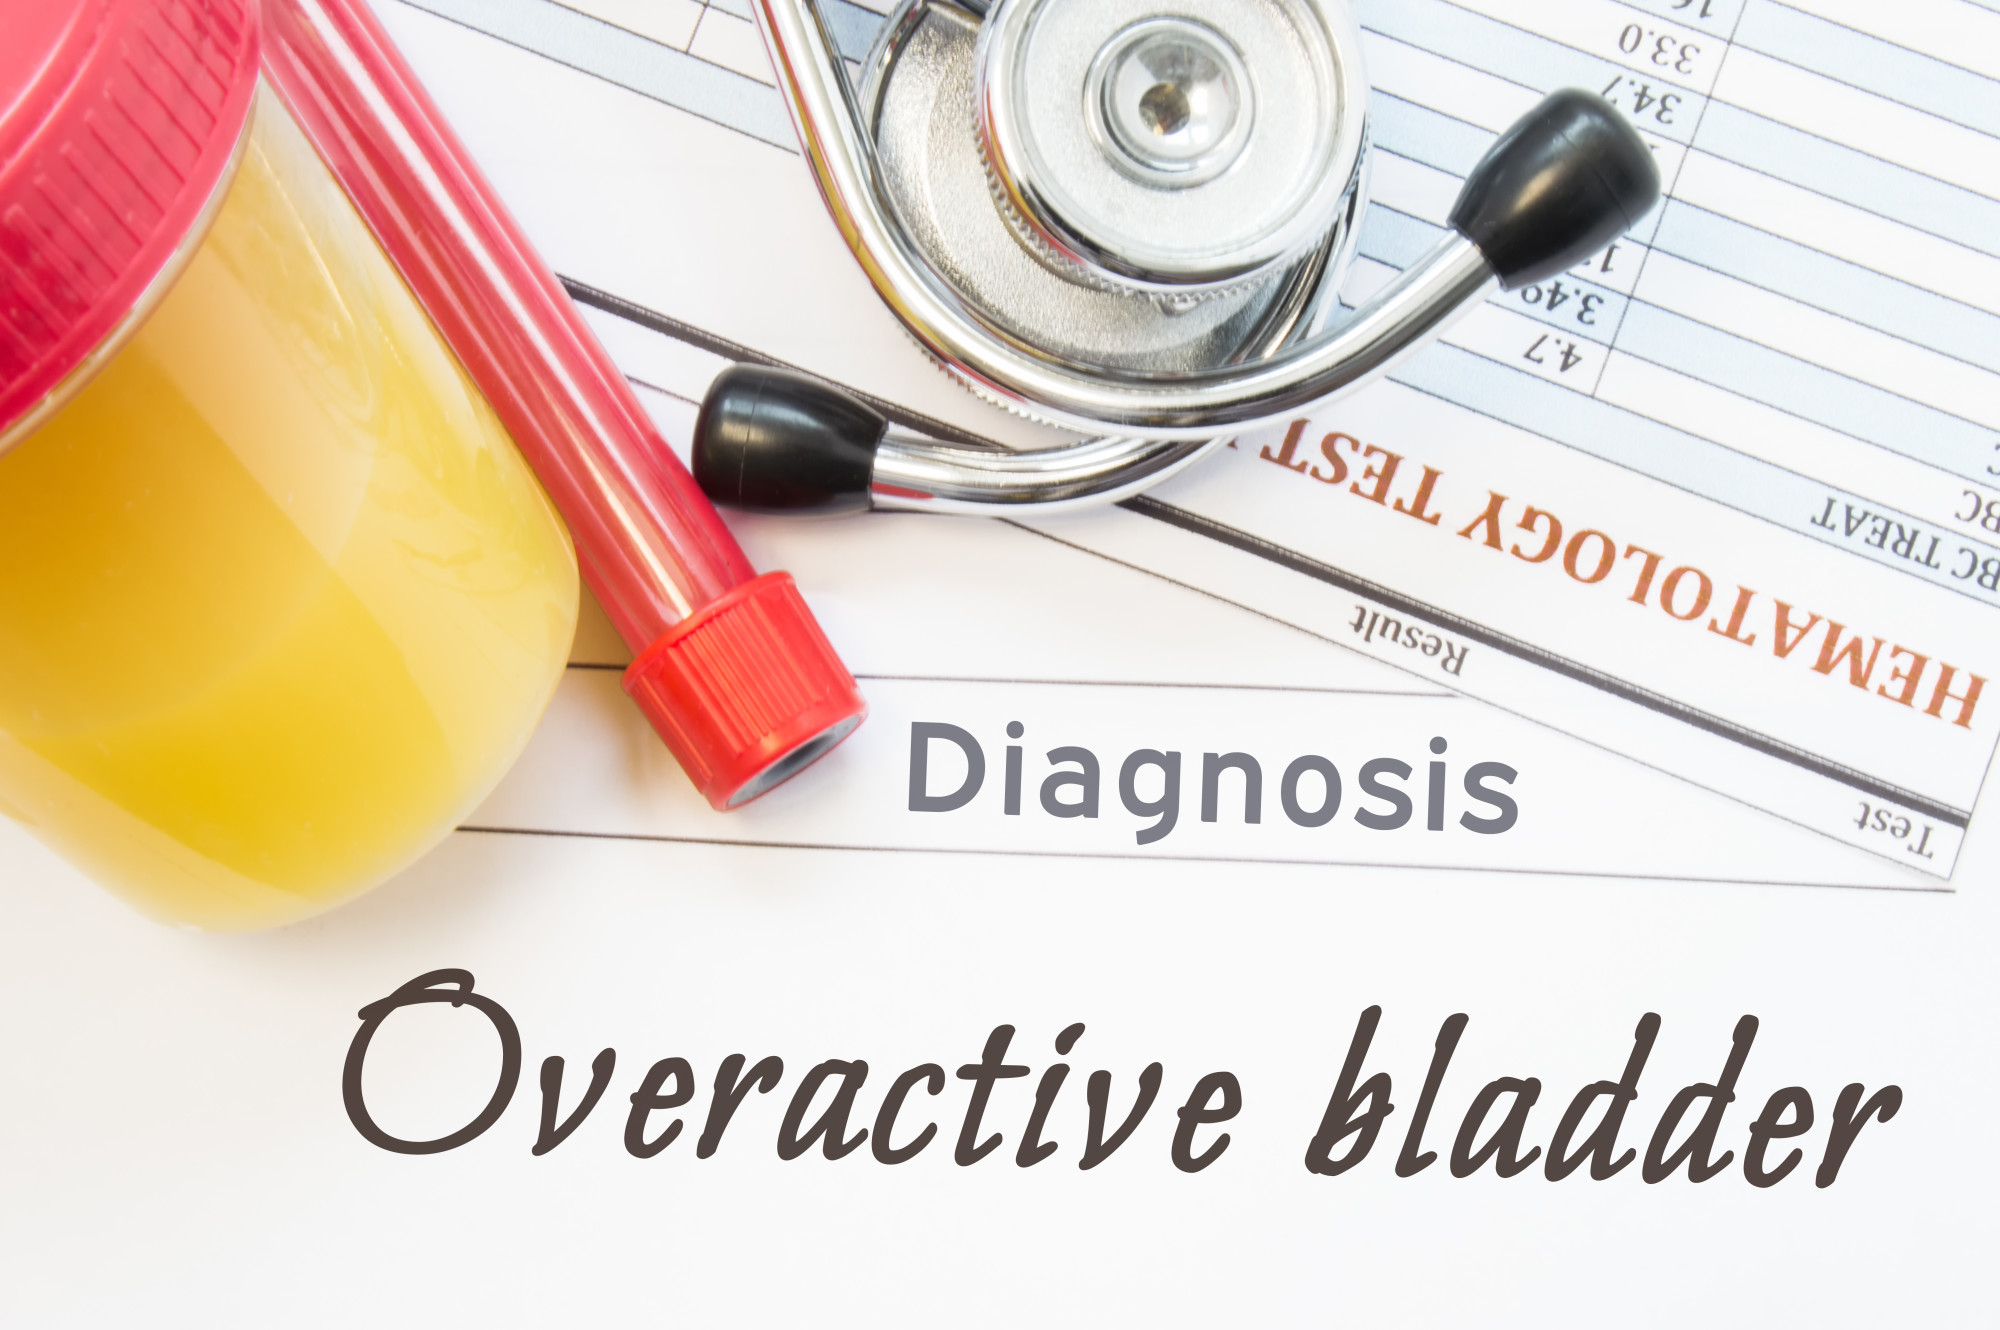 Overactive Bladder 101: Everything You Need To Know About OAB